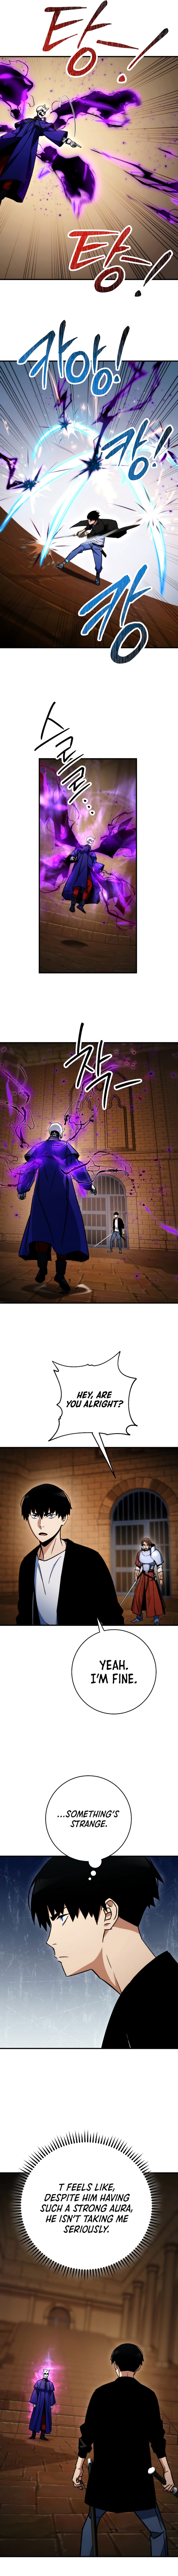 The Hero Returns - Chapter 32 Page 11